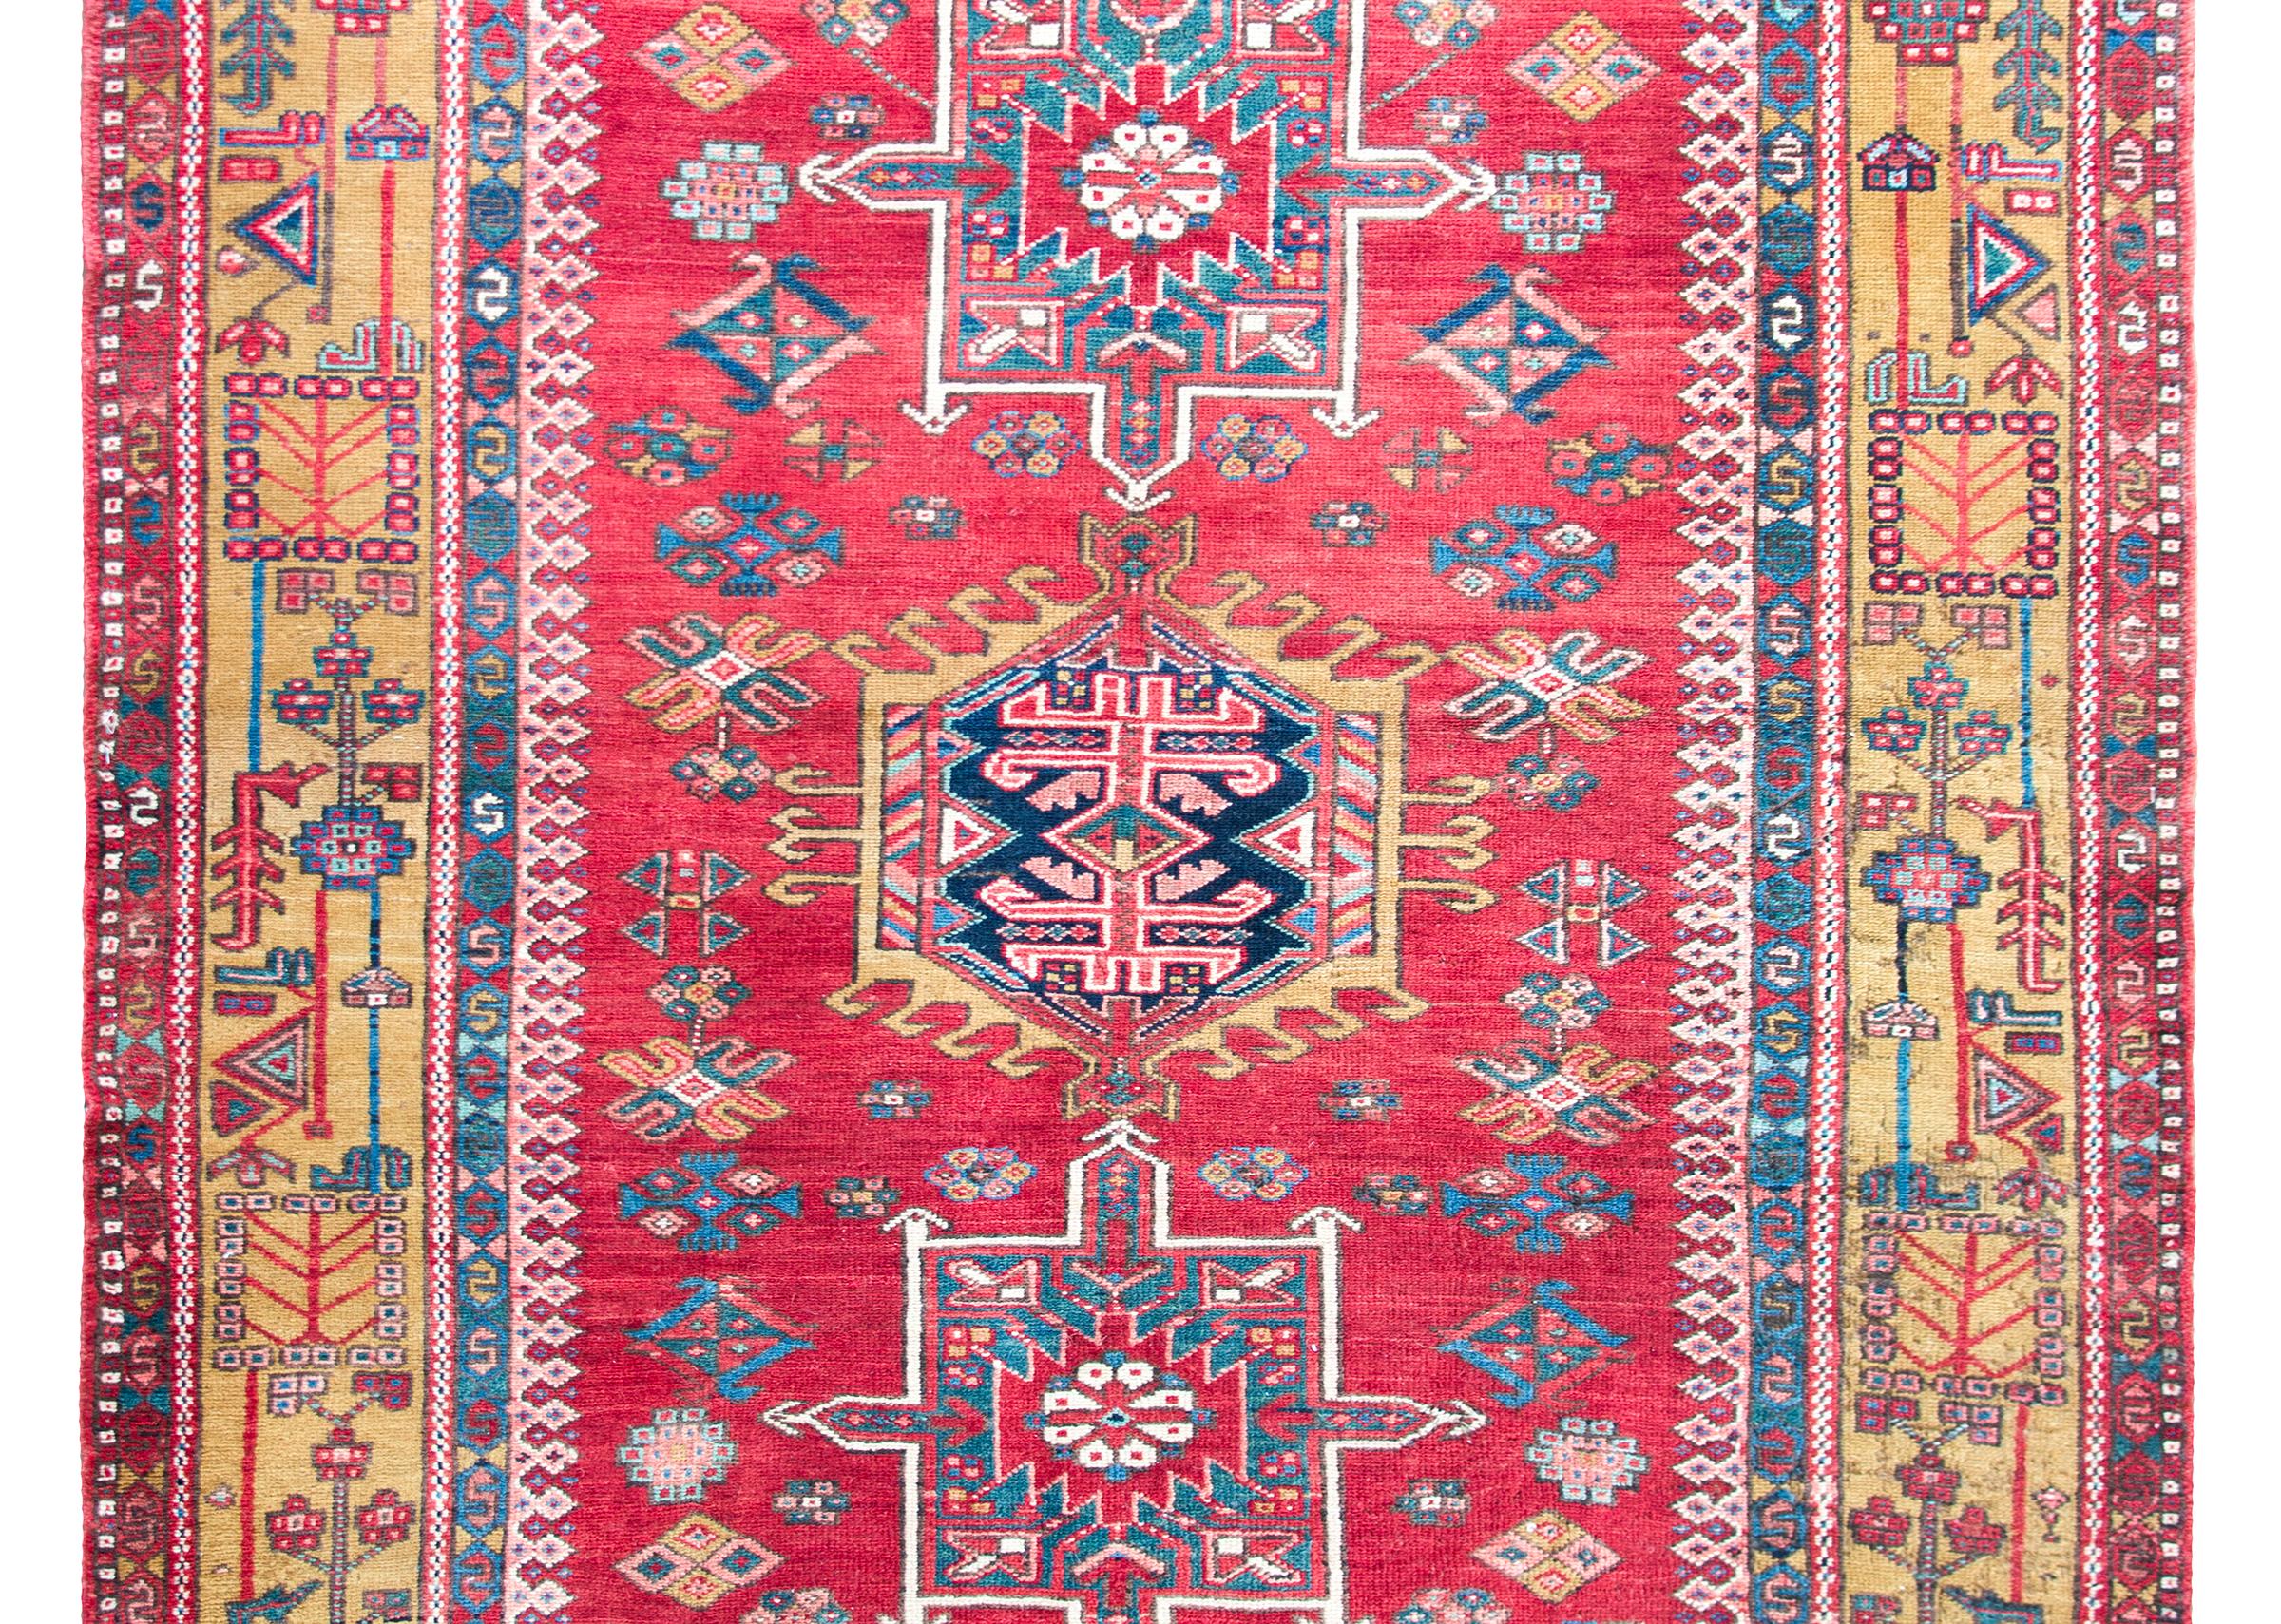 A striking early 20th century Persian Karaja rug with a tribal pattern containing three large central medallions heavily woven with stylized flowers, and living amidst a field of even more stylized flowers, surrounded by a wide border with a